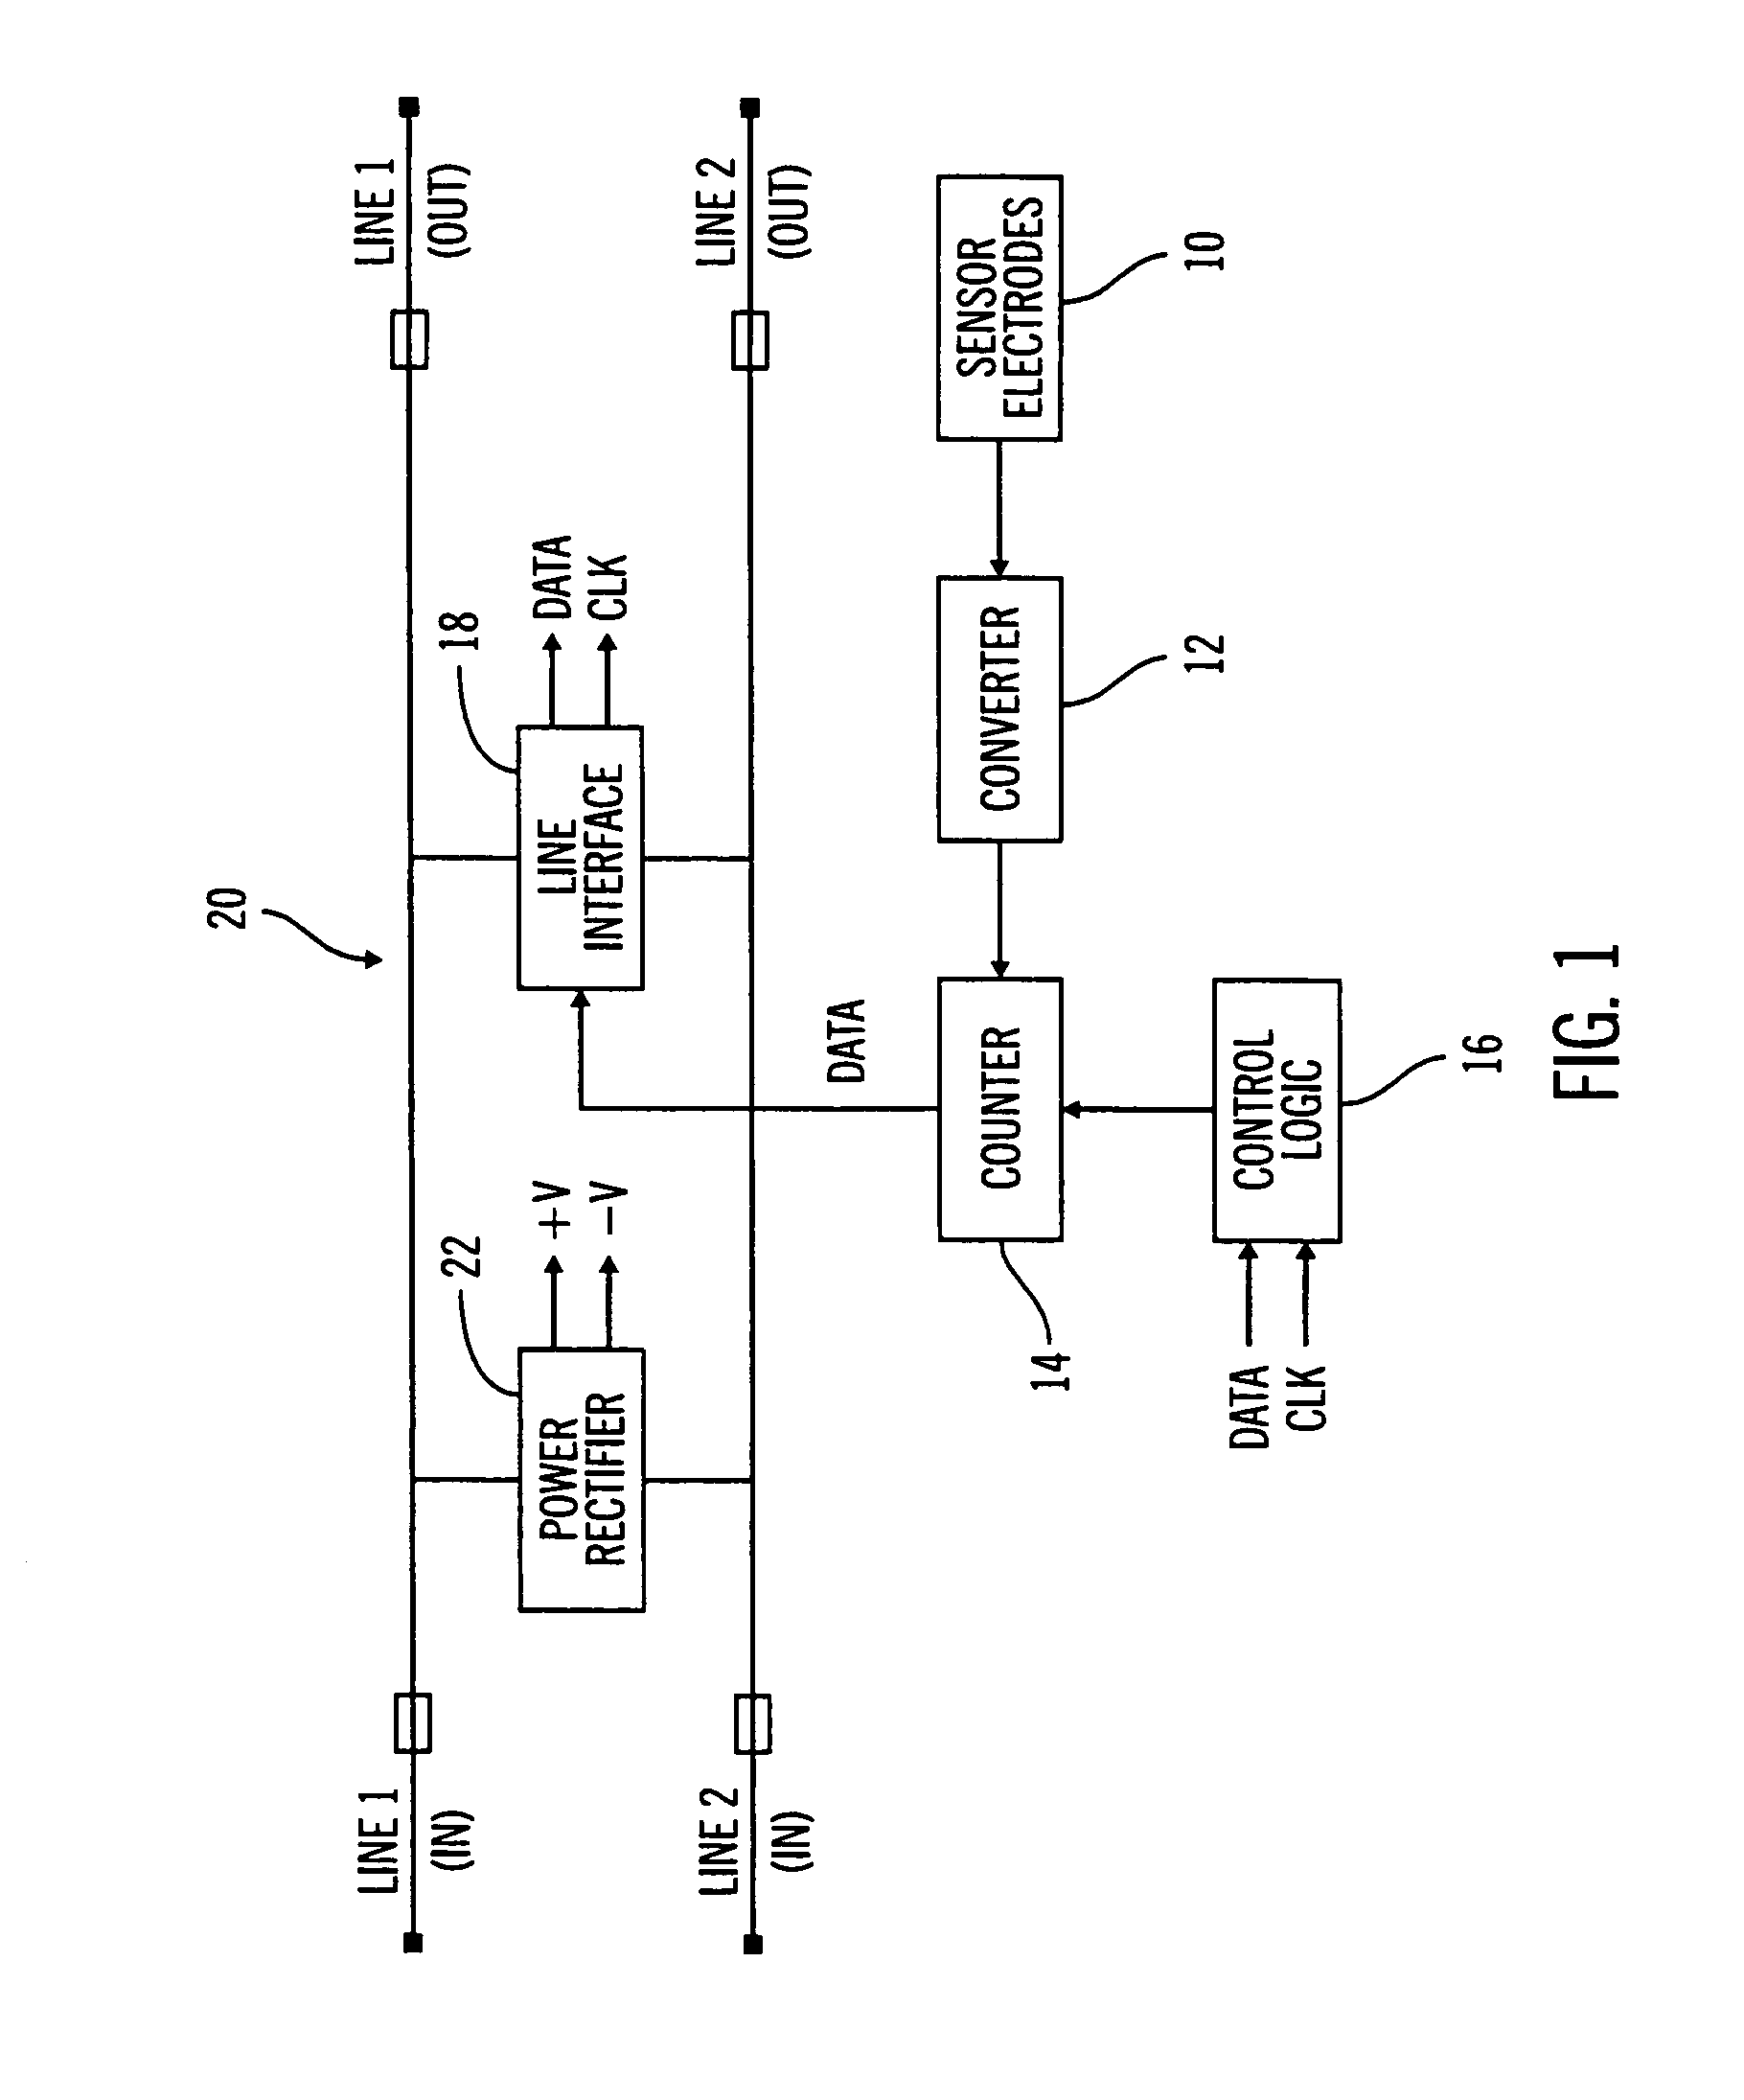 Implantable sensor electrodes and electronic circuitry